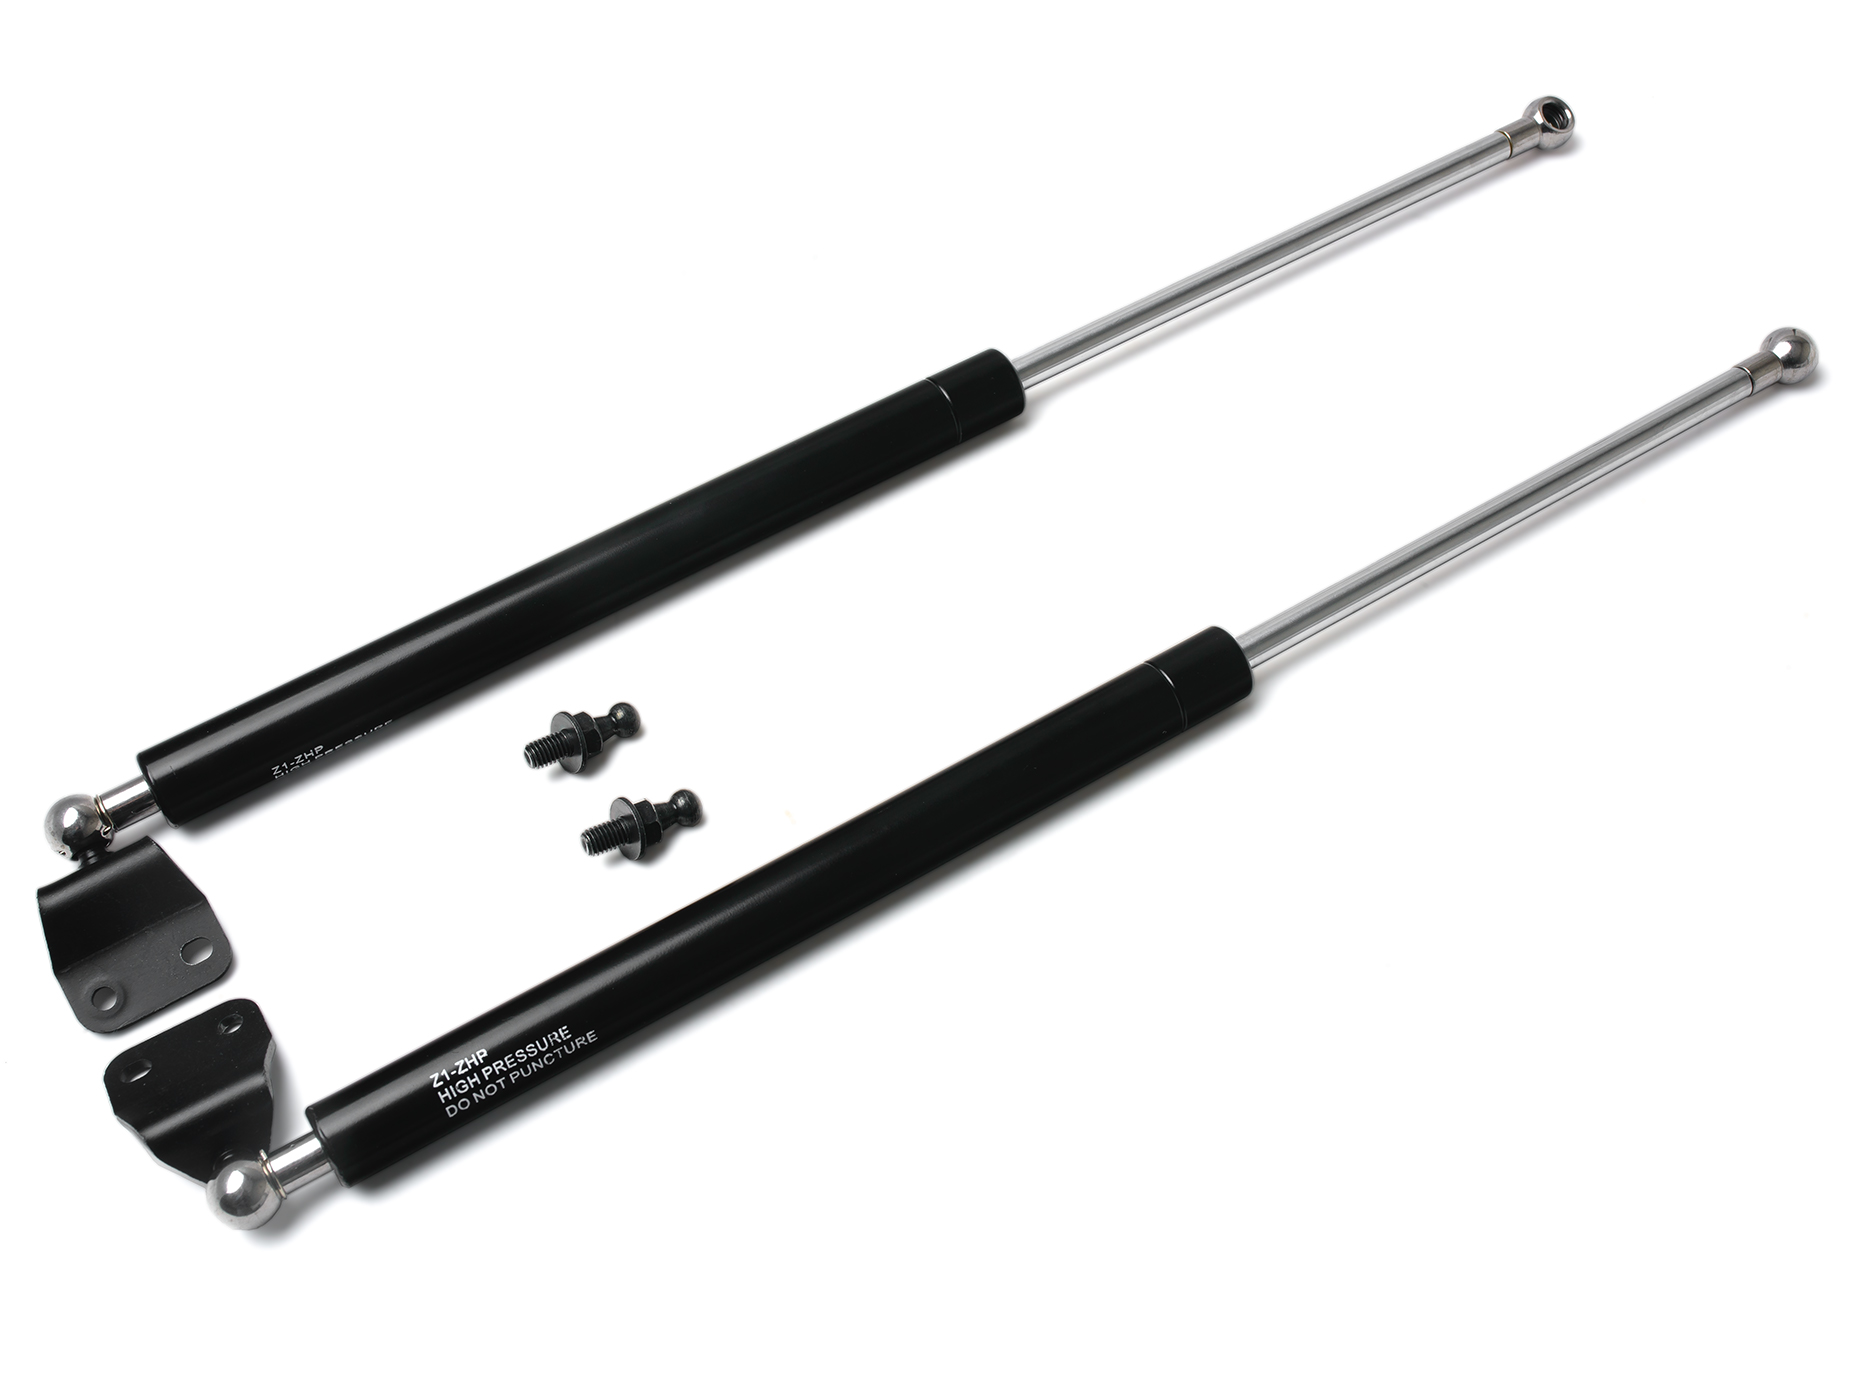 Fits Nissan 350Z 2003 To 2008 Rear Hatch Lift Supports With Rear Spoiler Qty 2 Bracket & Ball Stud Included 